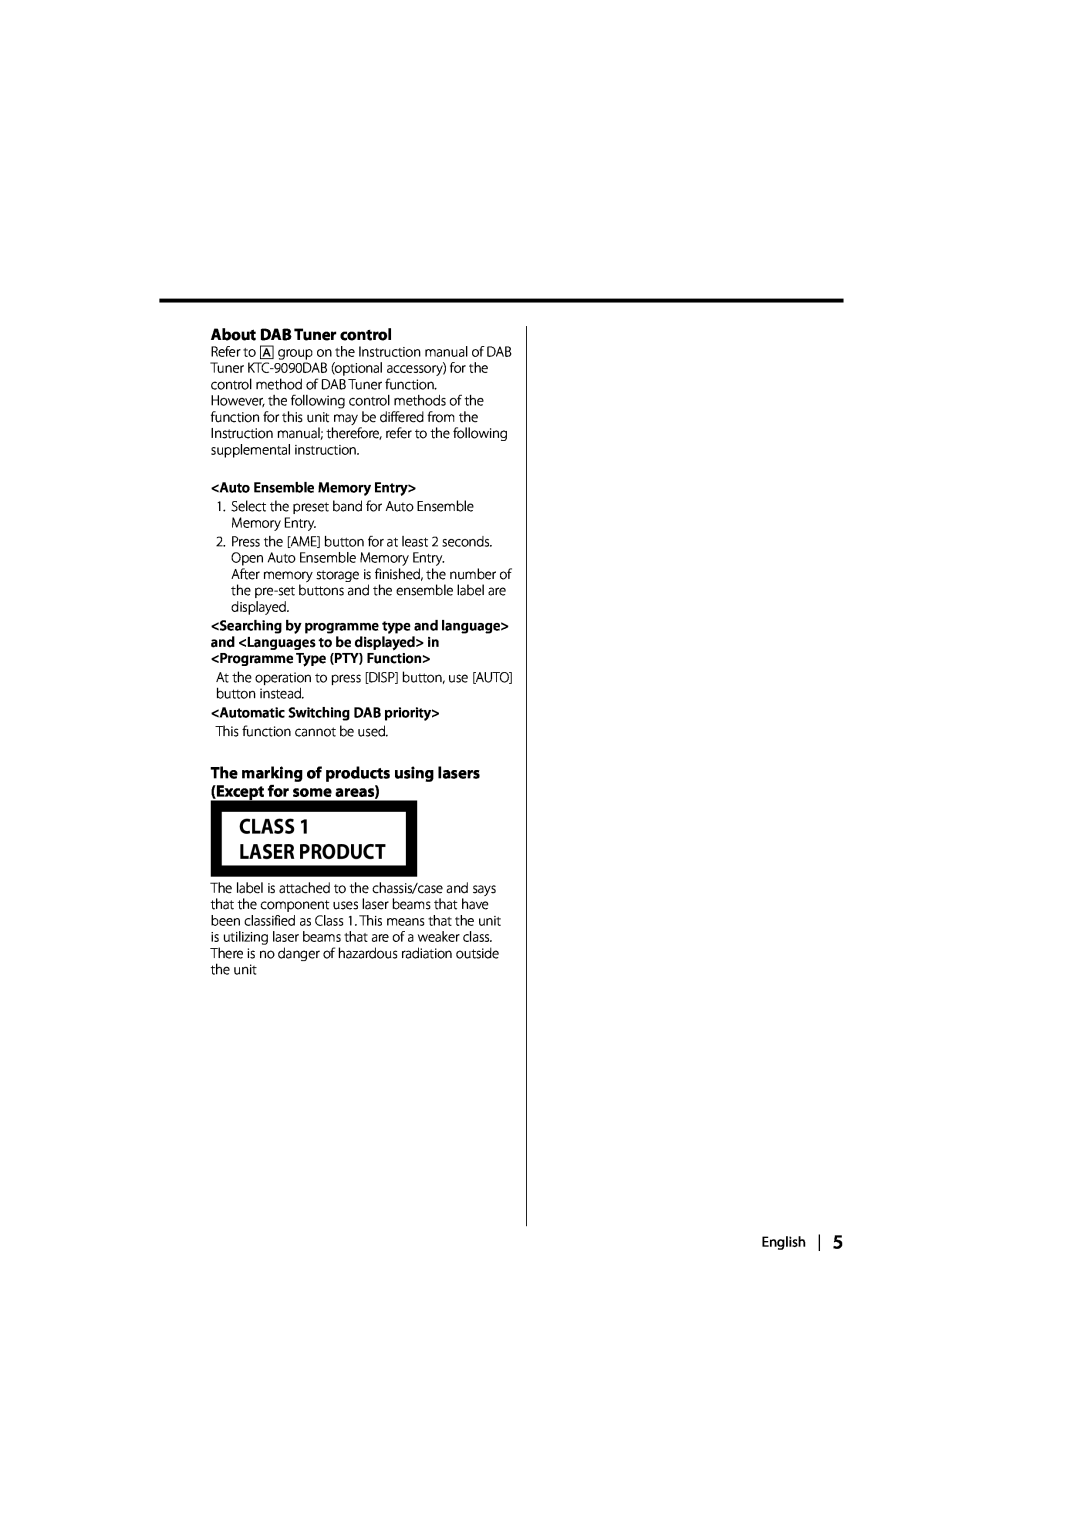 Kenwood DPX-MP2090U instruction manual About DAB Tuner control, Class Laser Product 